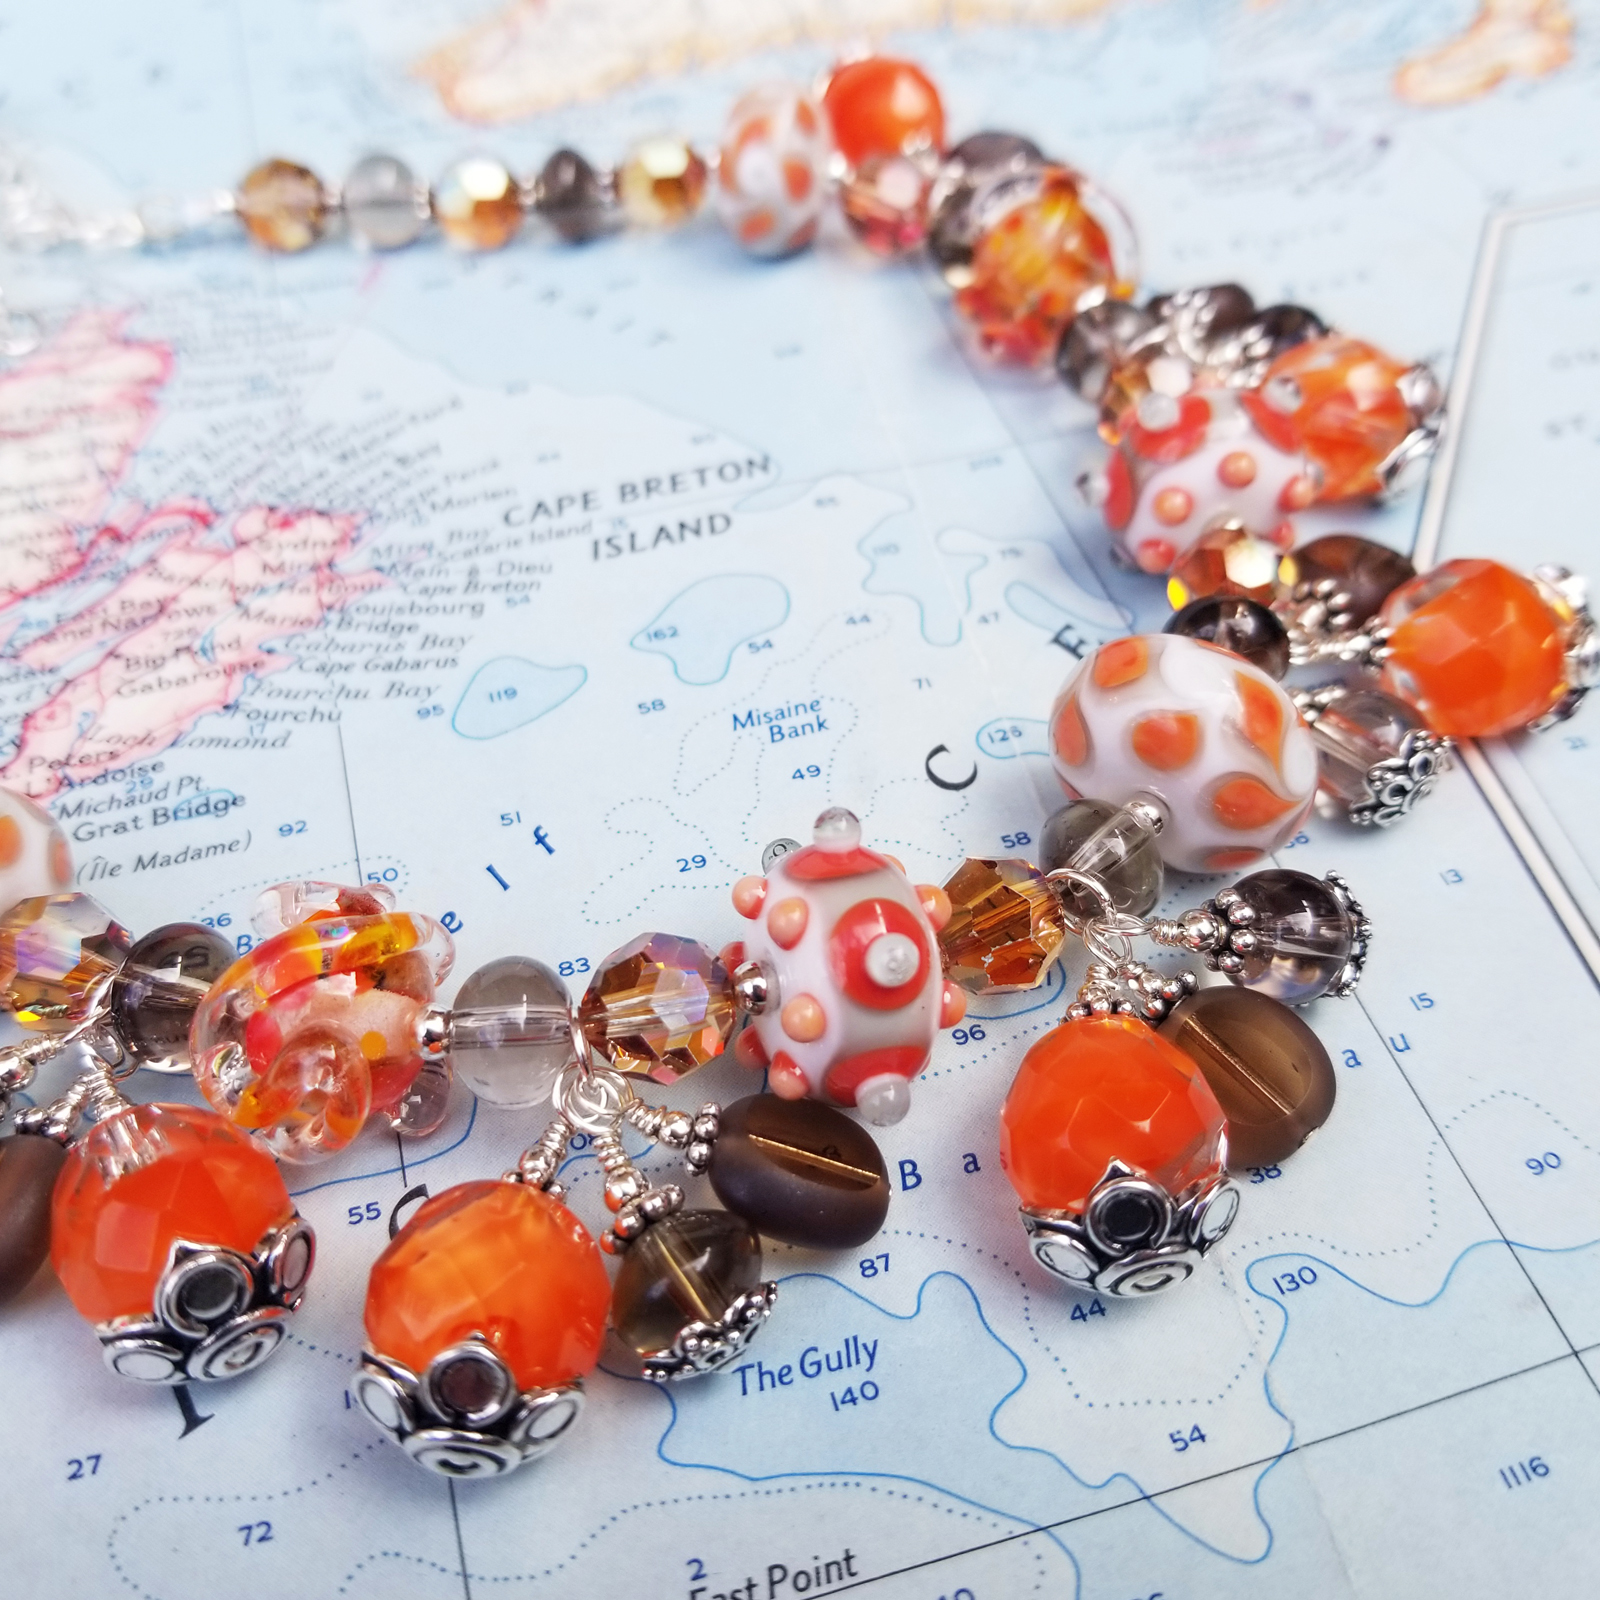 Creamsicle Lampwork and Crystal Statement Necklace